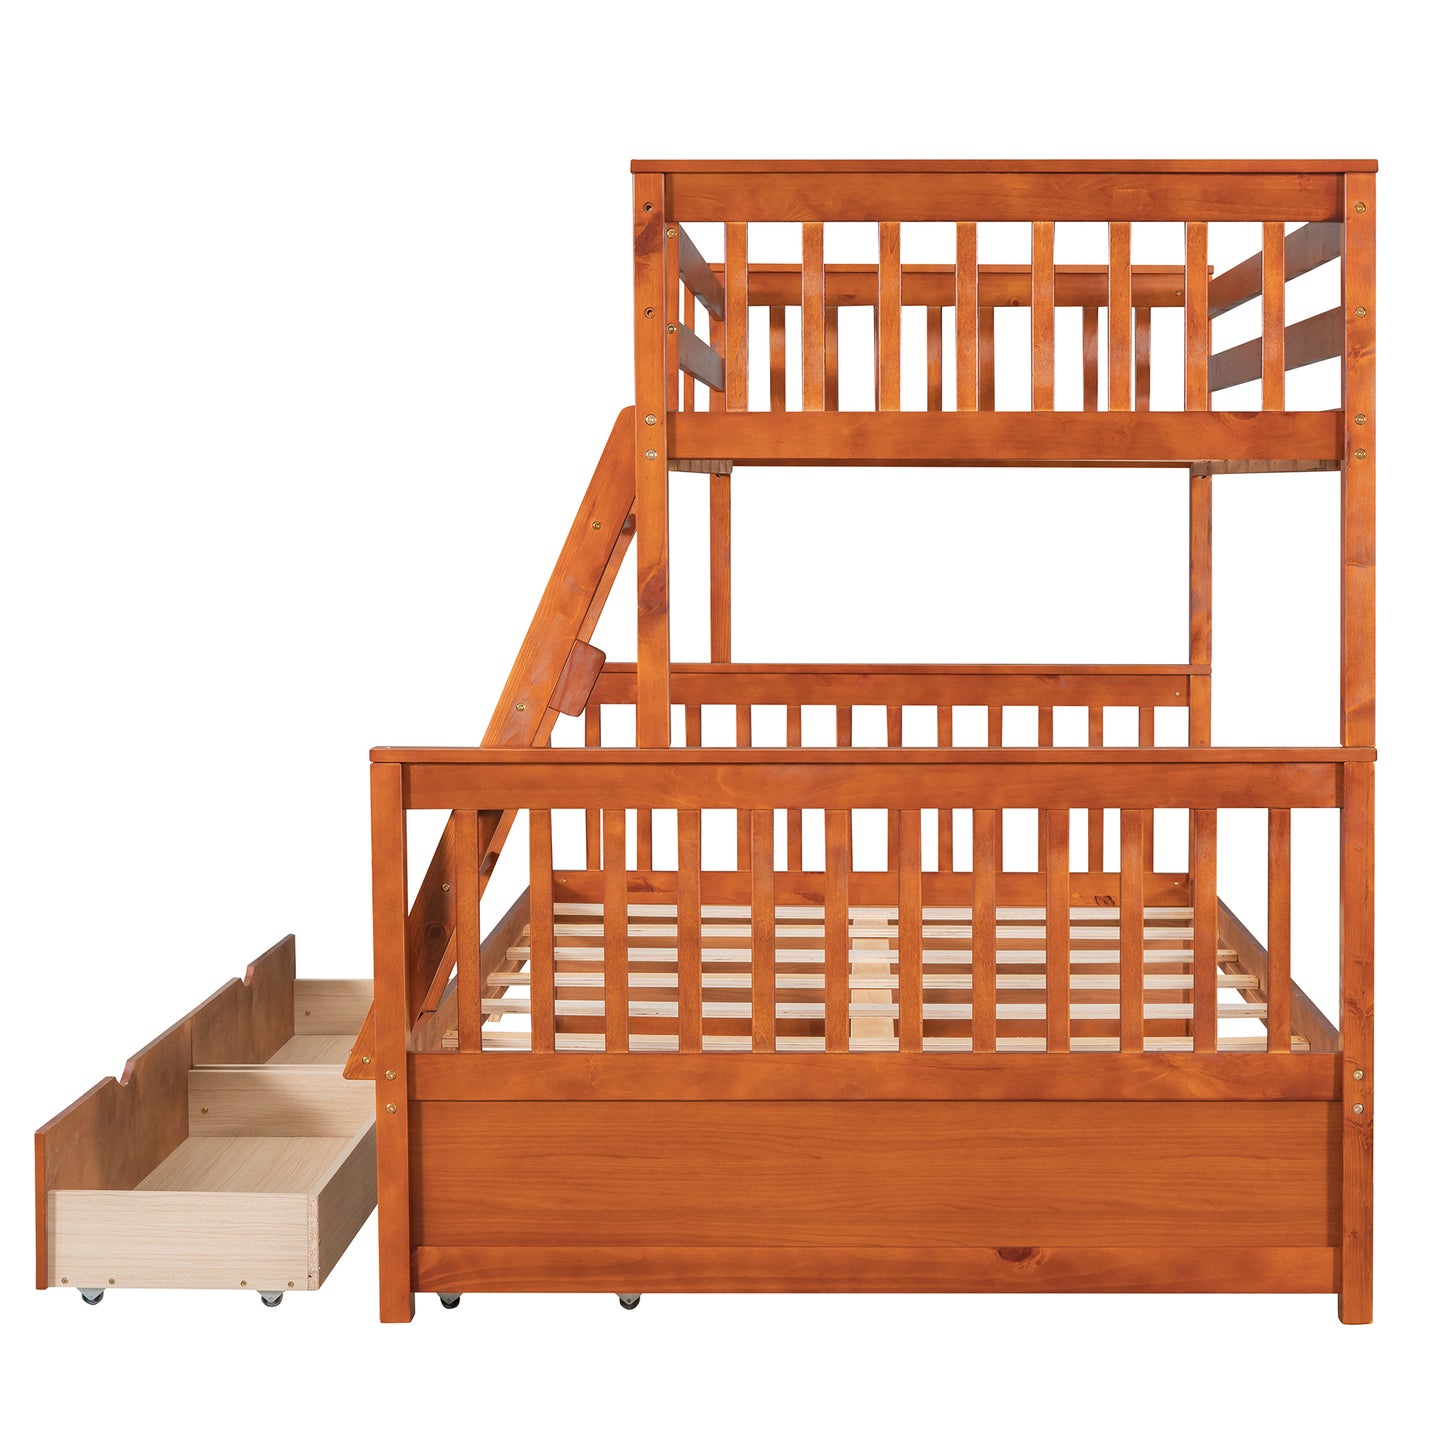 Twin-Over-Full Bunk Bed with Storage Drawers - Solid Pine Wood Sleepover Solution